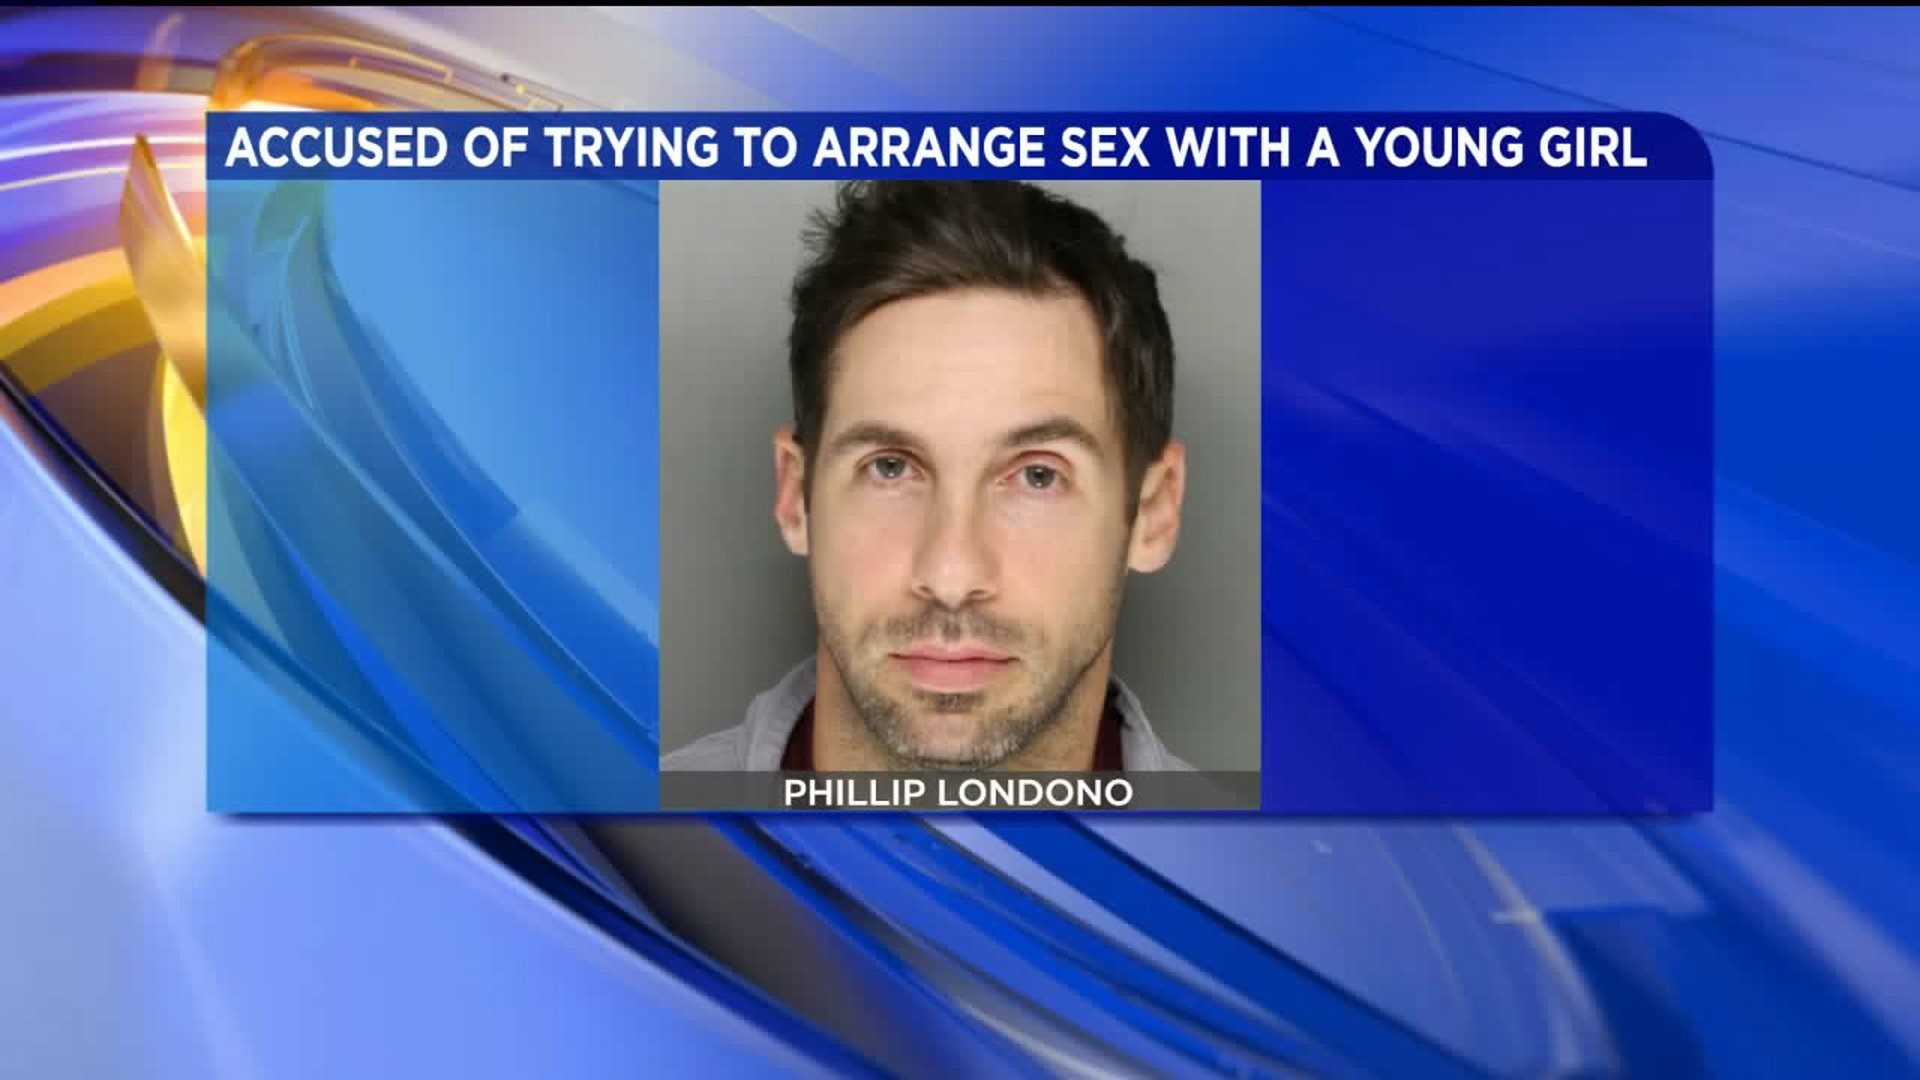 Police: Man Attempted to Pay for Sex with Underage Girl